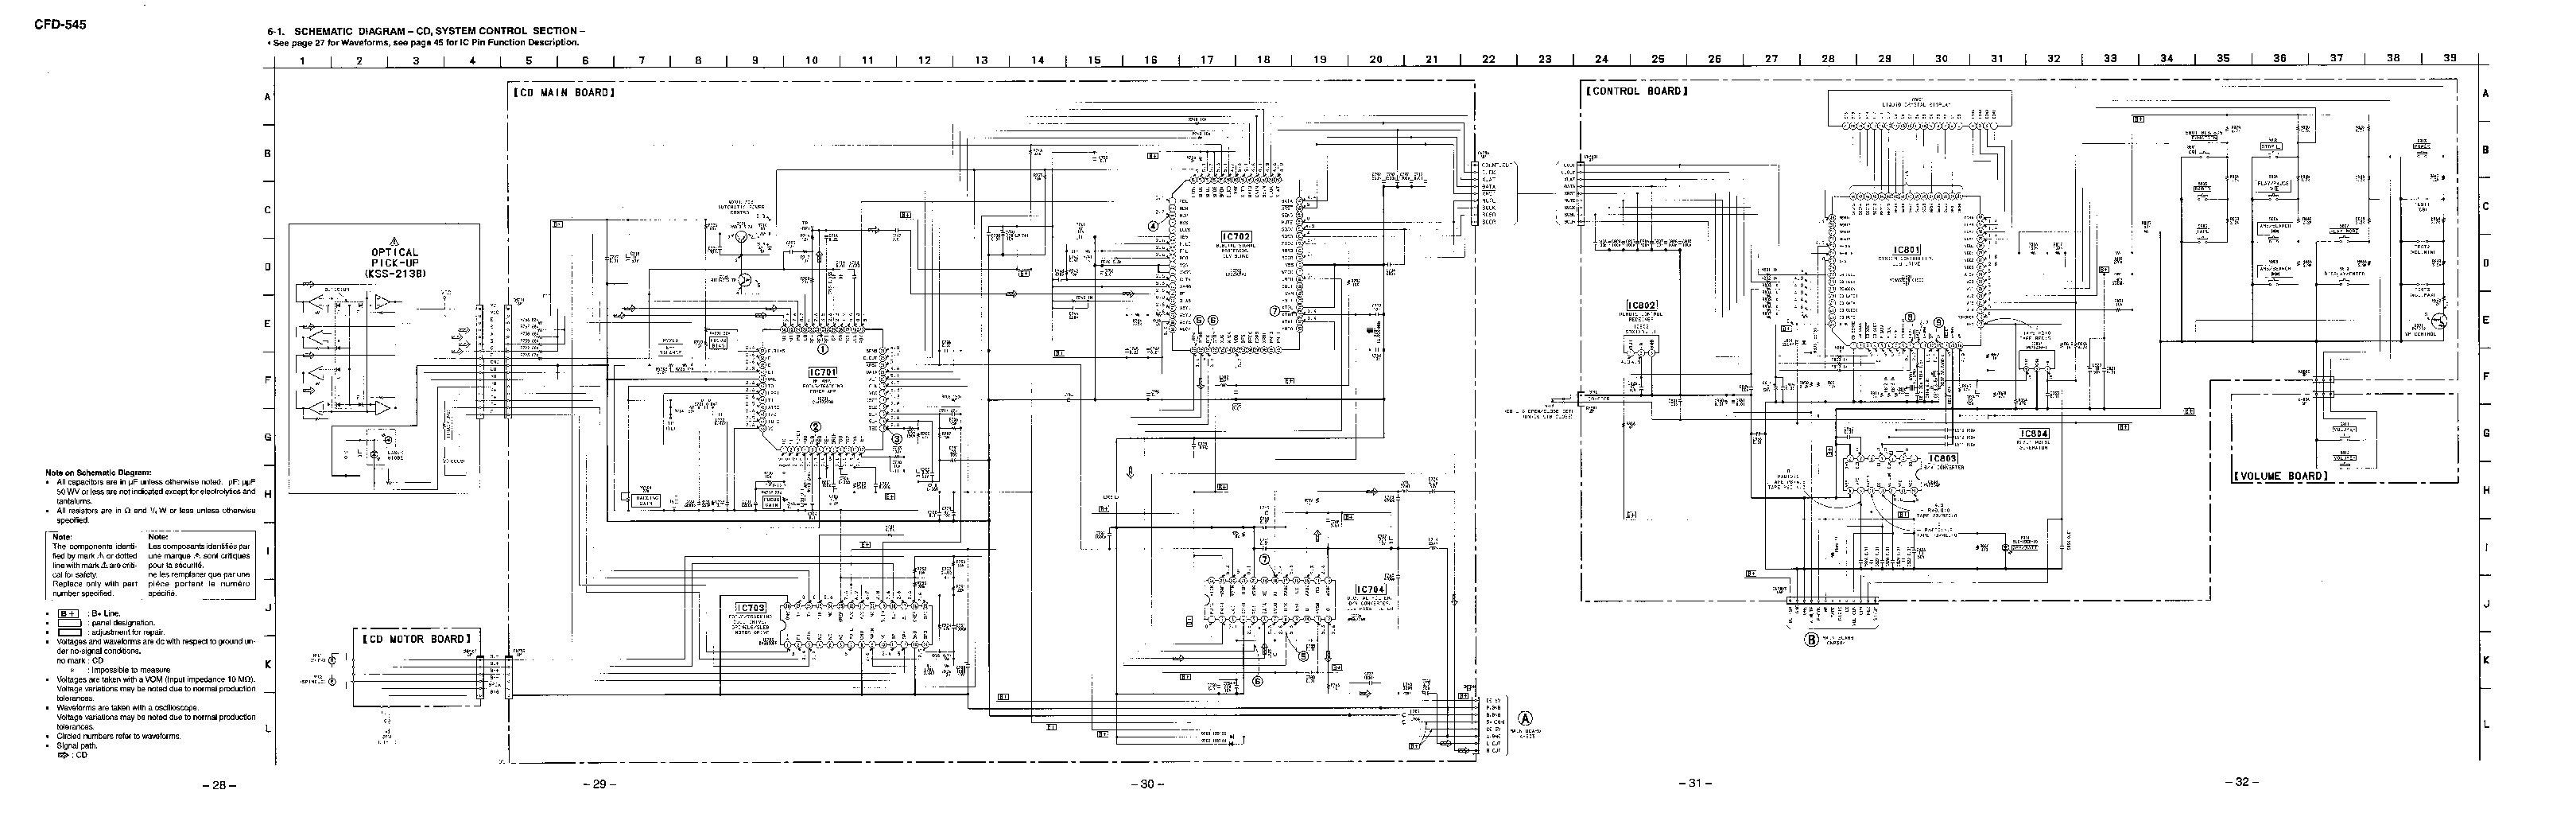 SONY CFD-545 service manual (2nd page)